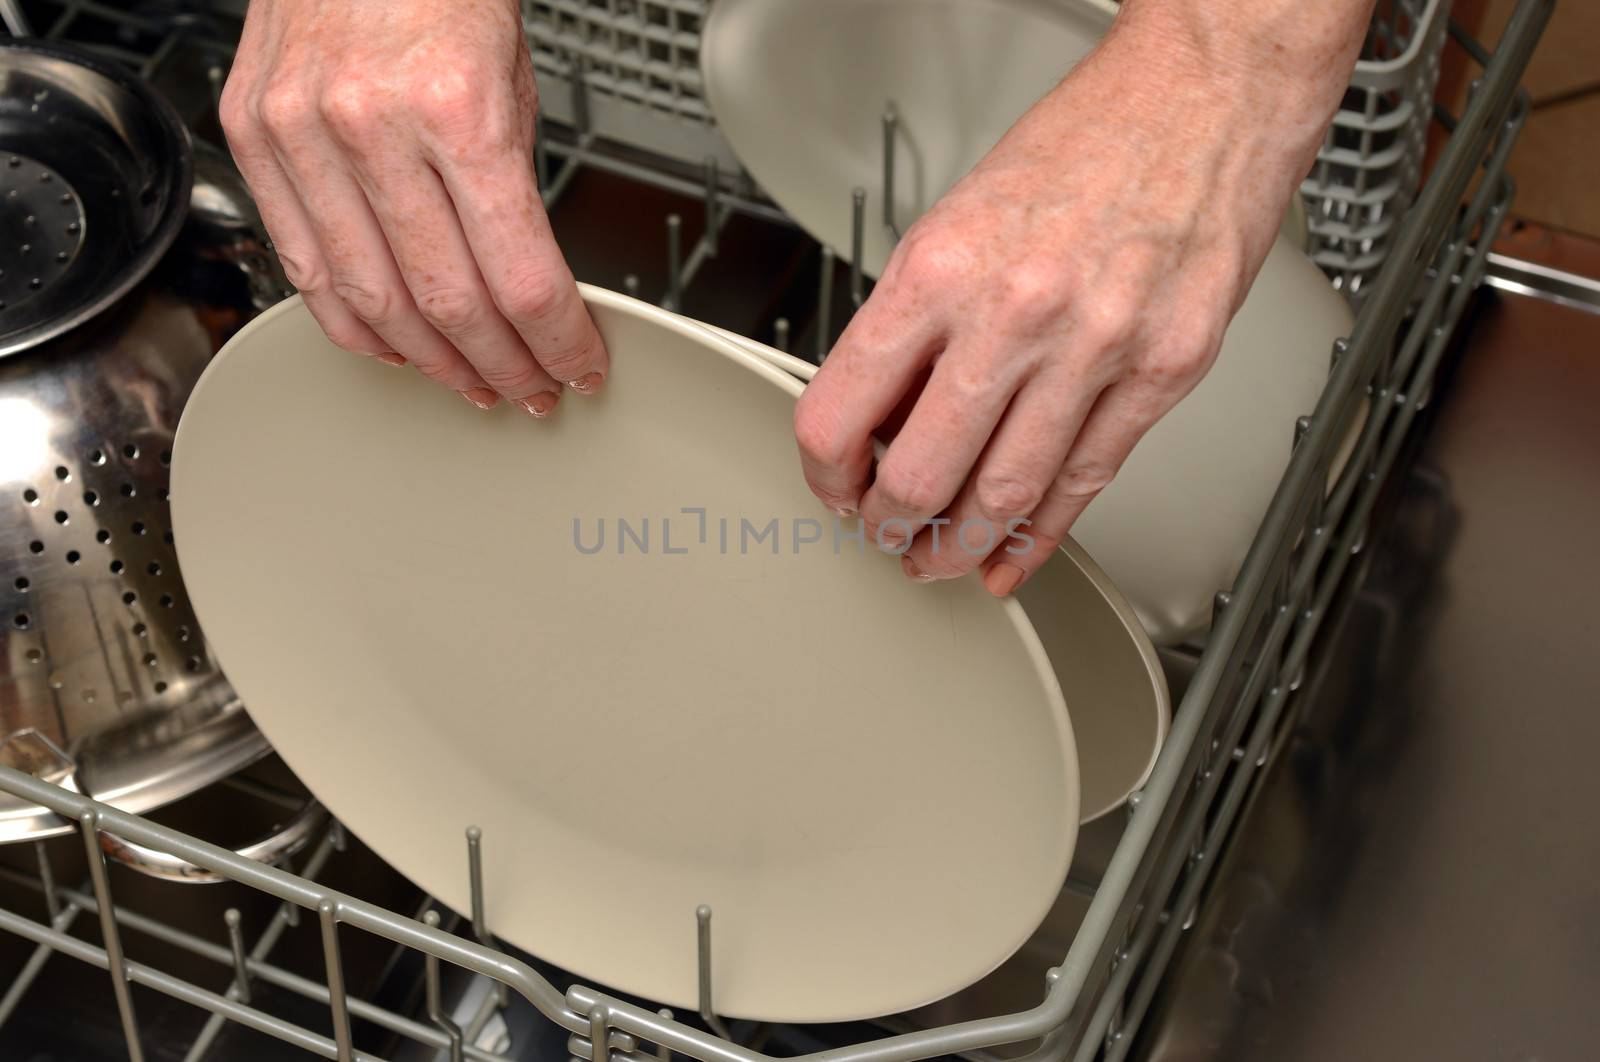 doing dishes and loading or unloading plate and a dishwasher